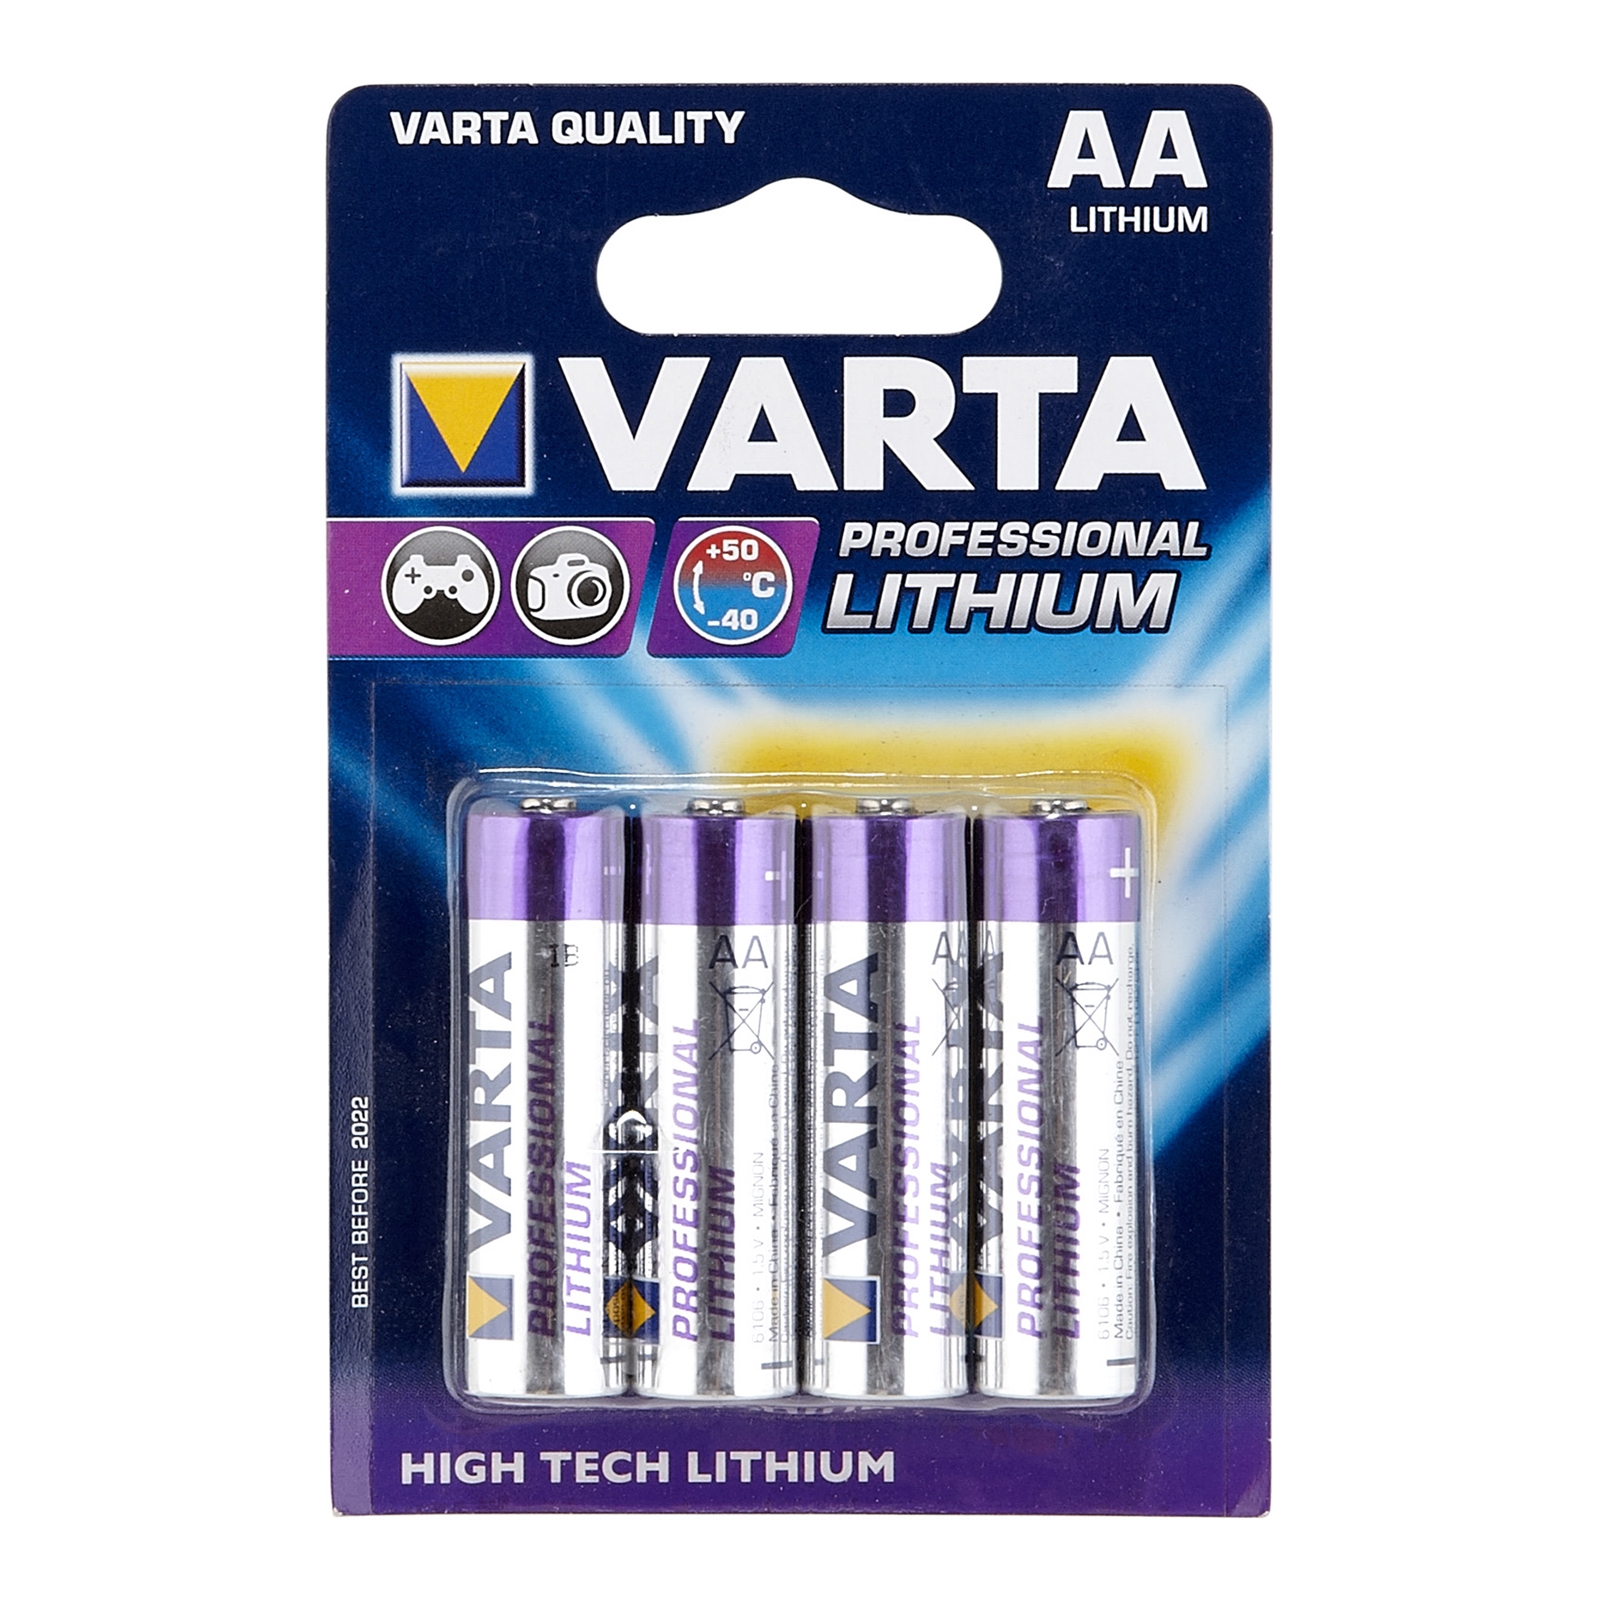 aa lithium batteries prices